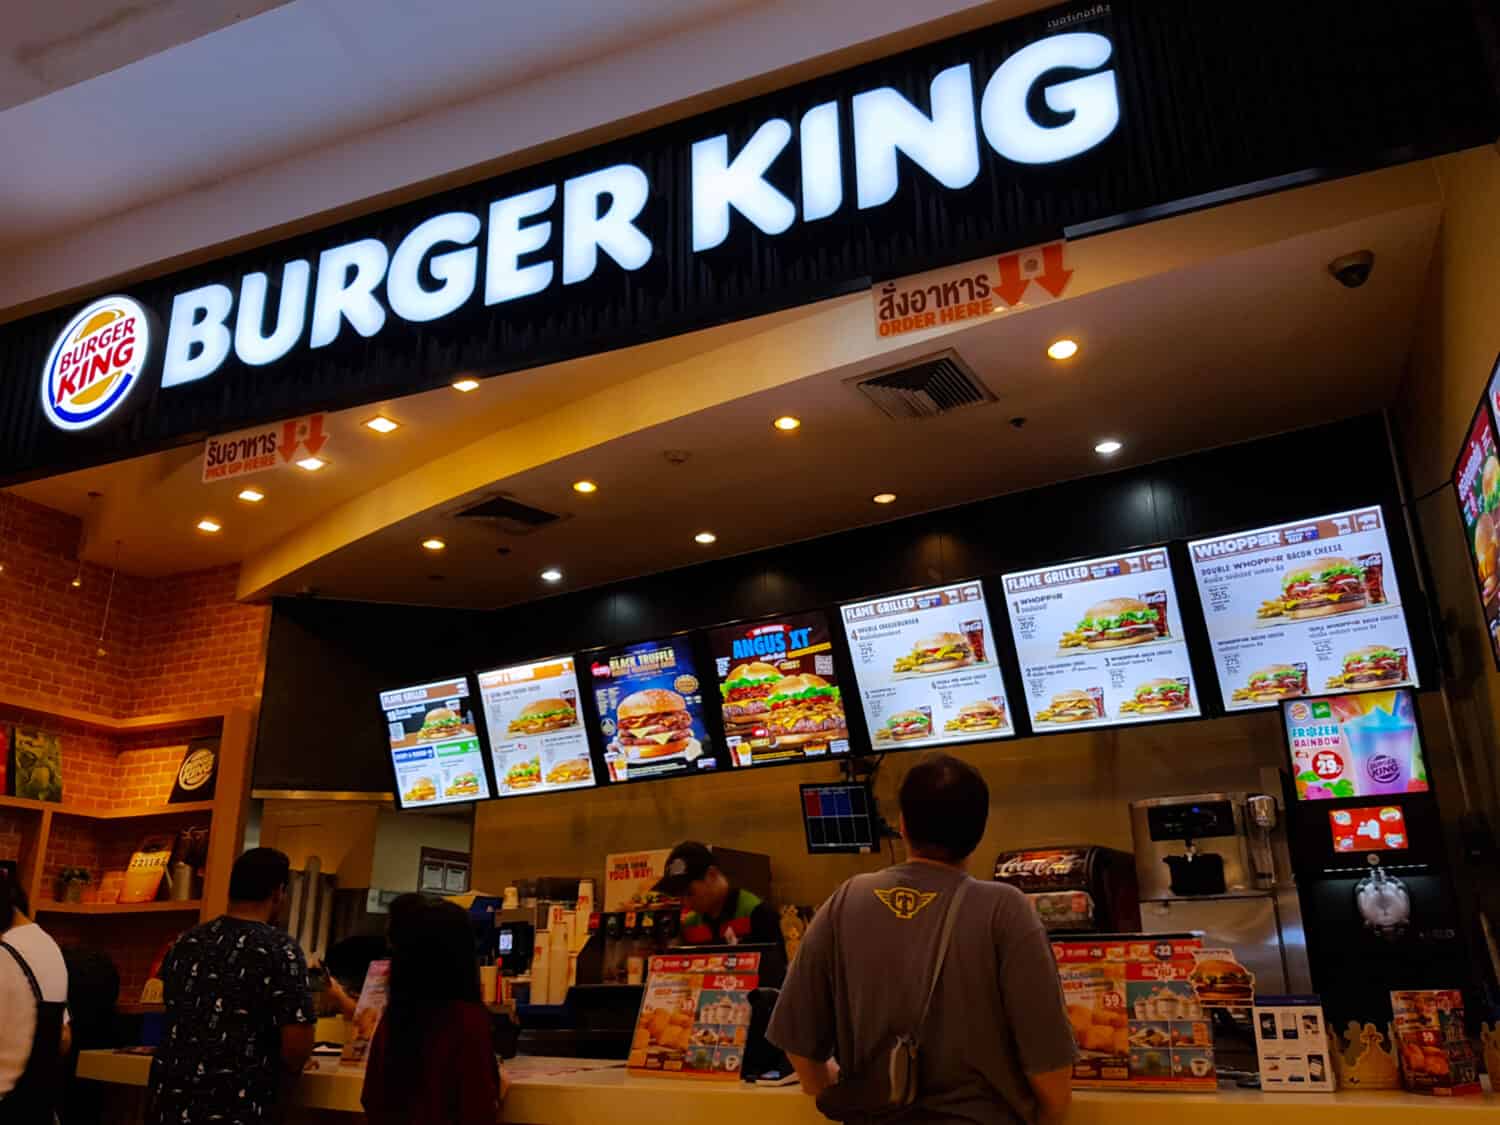 Bangkok, TH - DECEMBER 21, 2017: American Burger King's branch are franchised in the base ground floor in the Siam Paragon, the most luxury shopping mall in Bangkok.